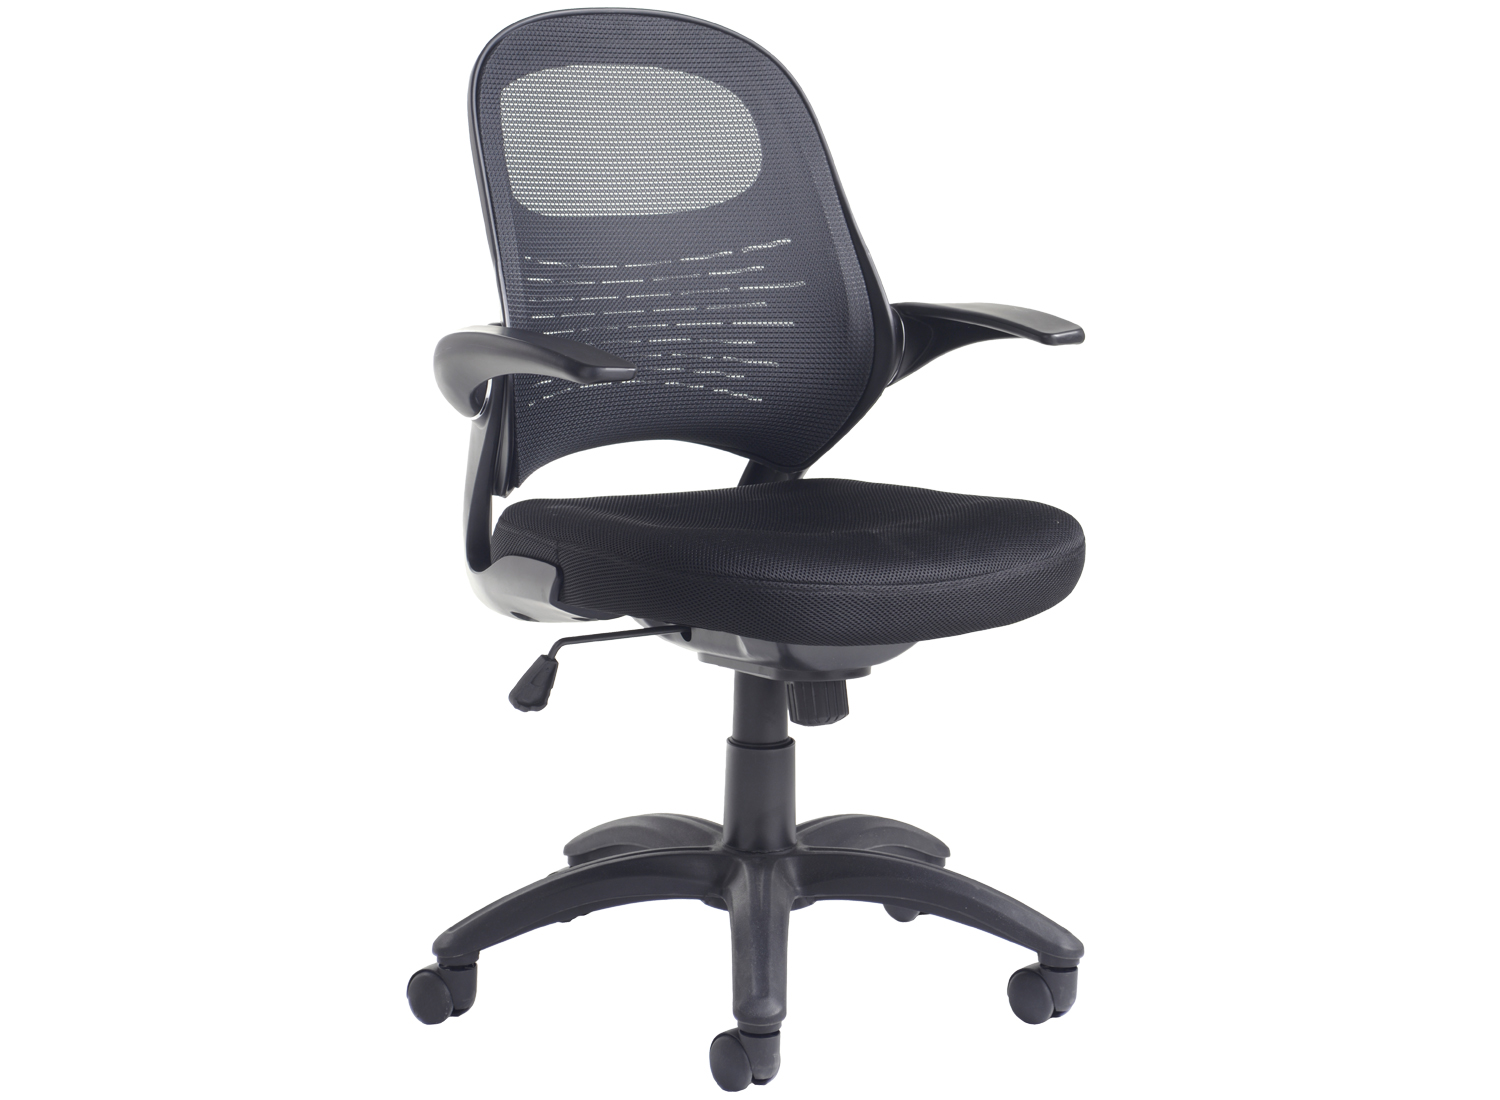 Orion Mesh Back Operator Office Chair, Black, Express Delivery